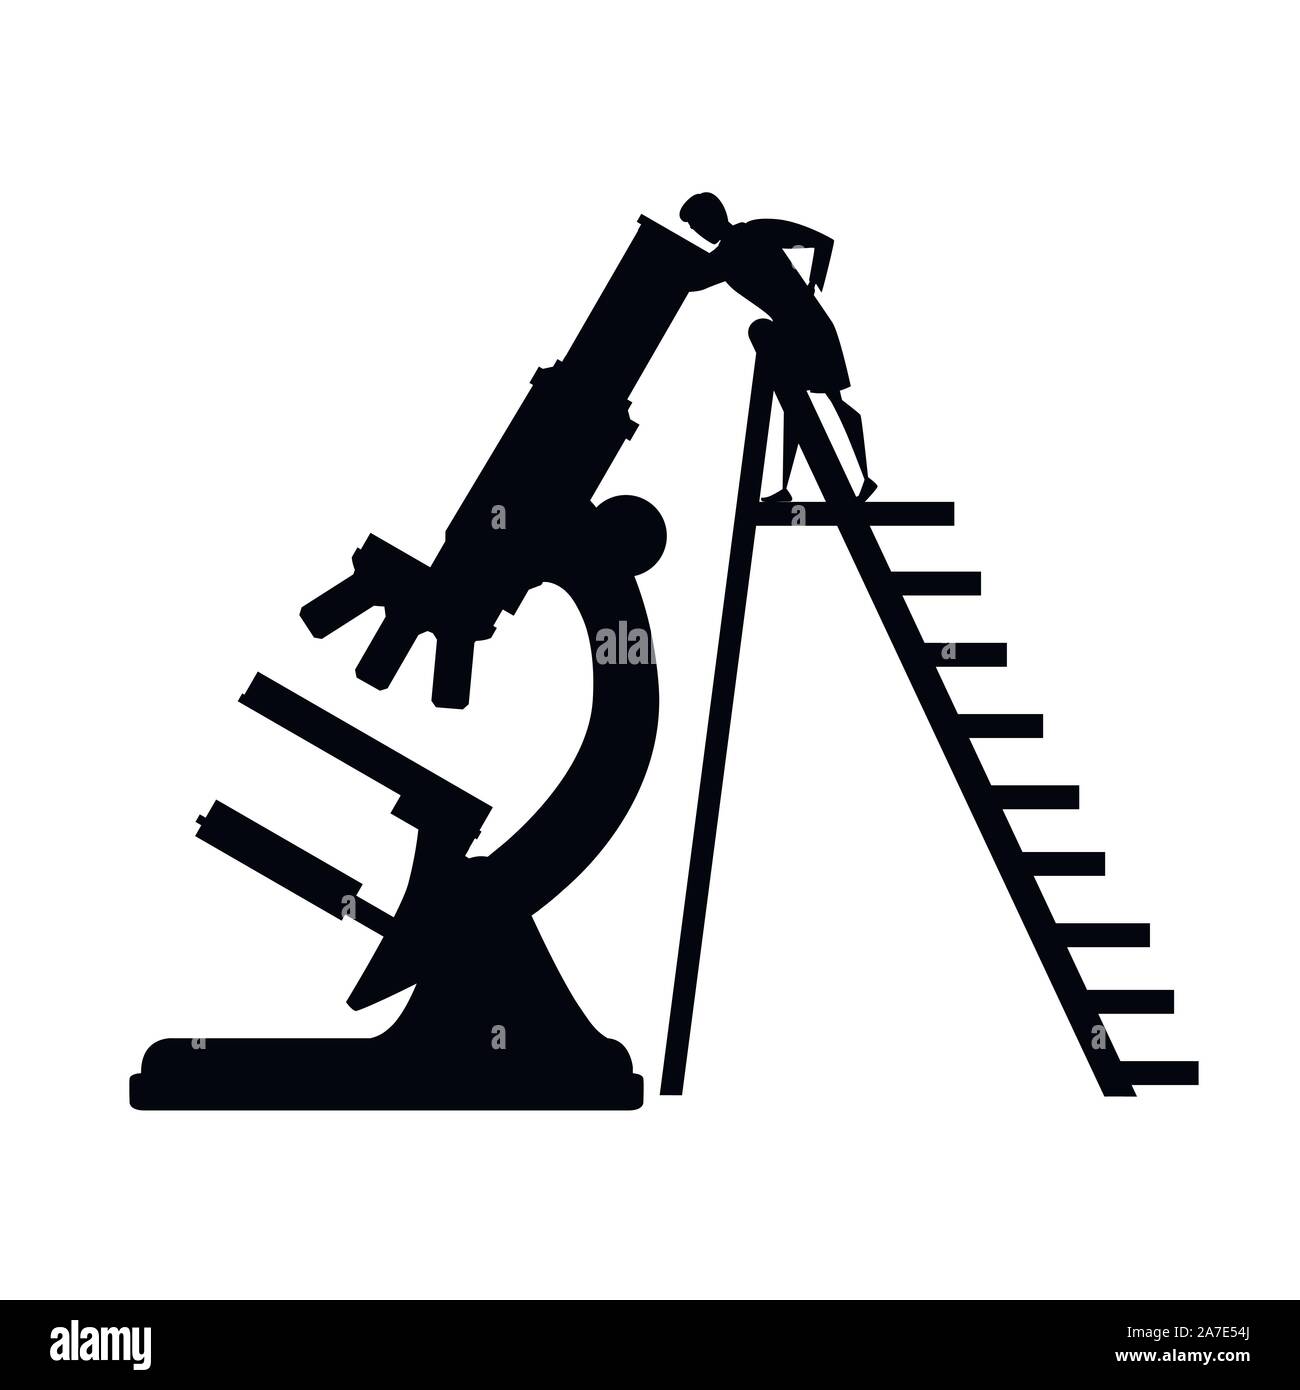 Black silhouette big microscope with scientist climbs the ladder cartoon character design flat vector illustration on white background. Stock Vector